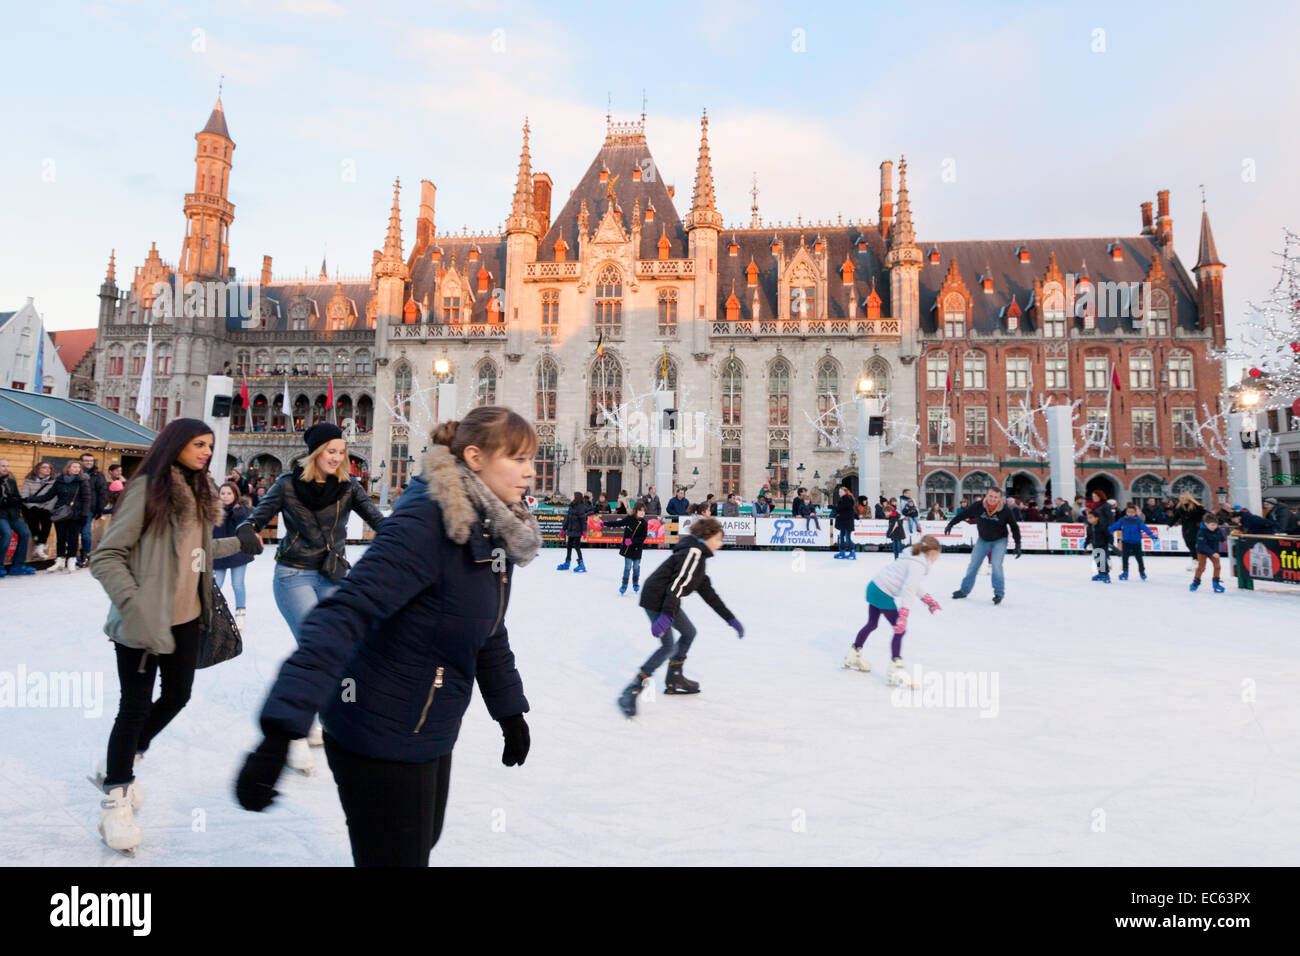 People on the ice skating rink at the Bruges Christmas Market in the market Square, Bruges city centre, Belgium Europe Stock Photo